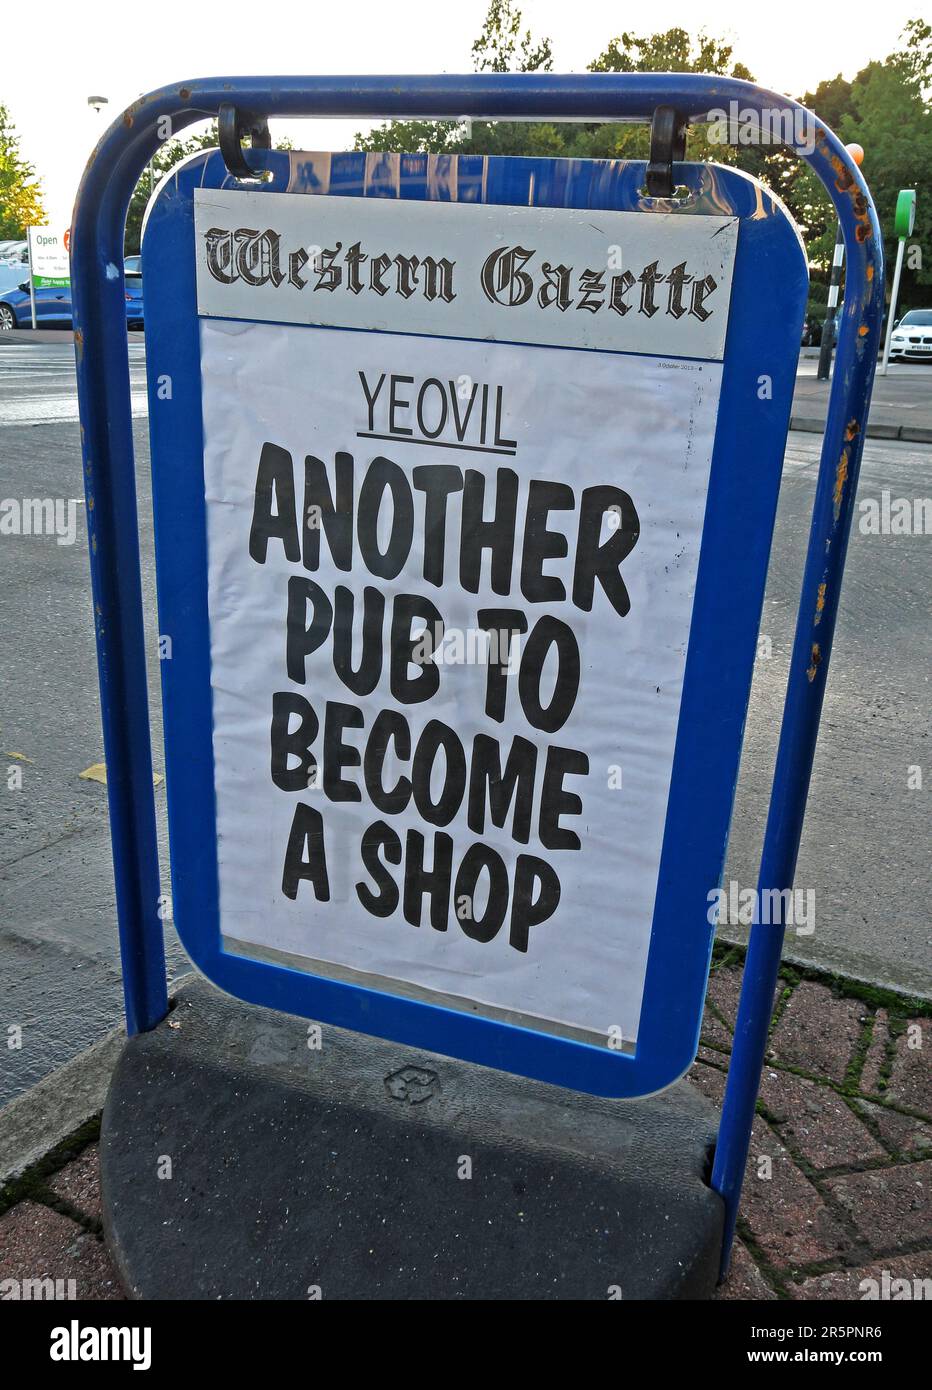 Yet another pub to become a shop, headline from the Yeovil Western Gazette, Somerset, South West England, UK Stock Photo